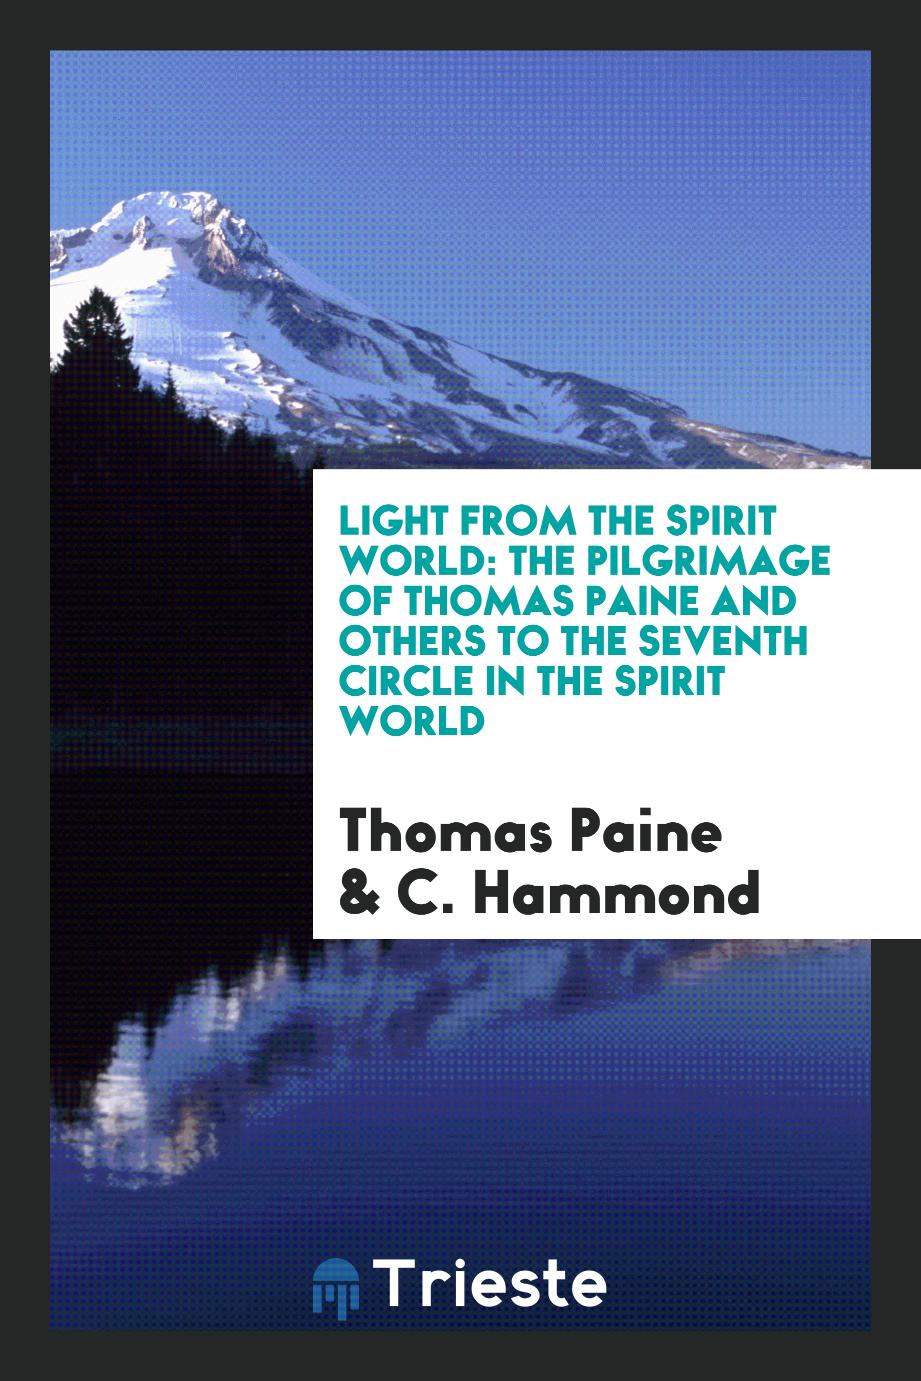 Light from the Spirit World: The Pilgrimage of Thomas Paine and Others to the Seventh Circle in the Spirit World